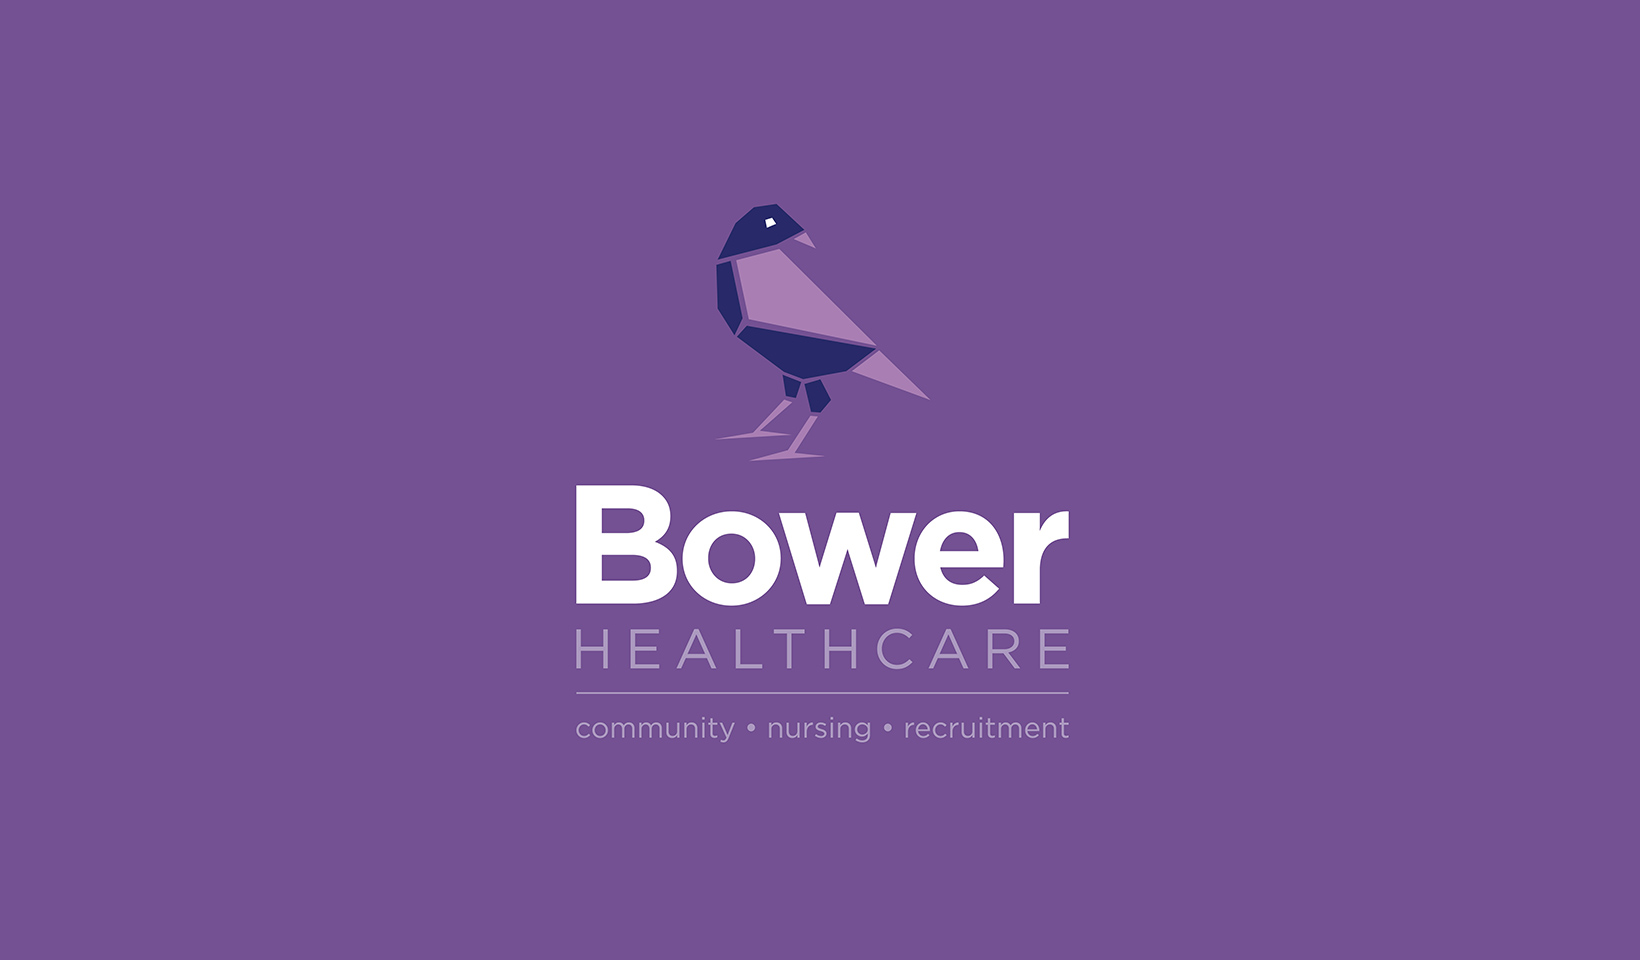 Bower Healthcare Brand Identity Development by Think Creative Agency 7